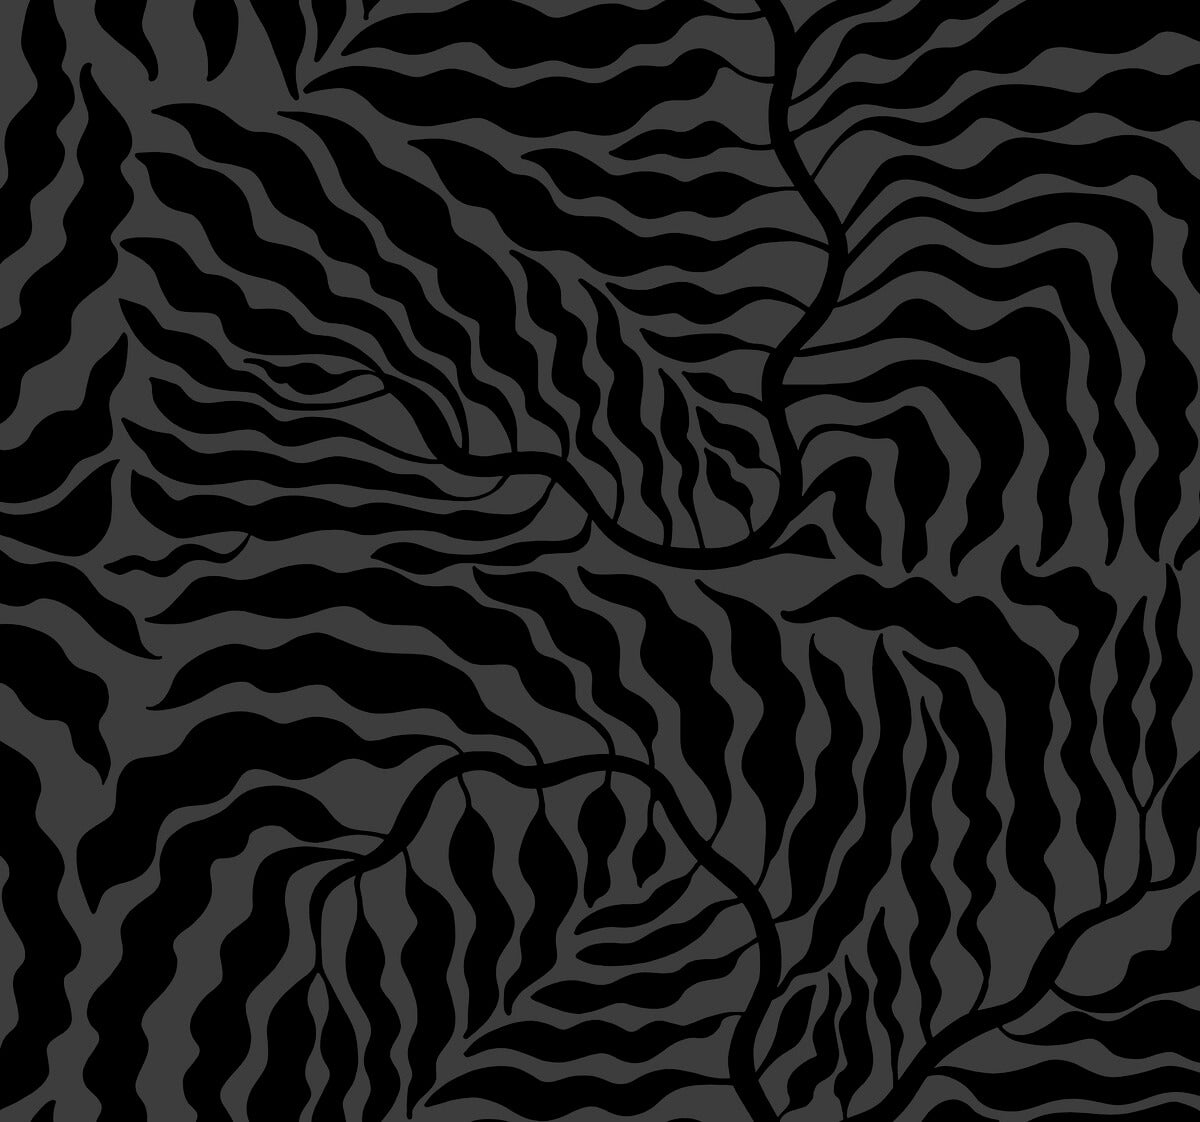 Artistic Abstracts Fern Fronds Wallpaper - Black